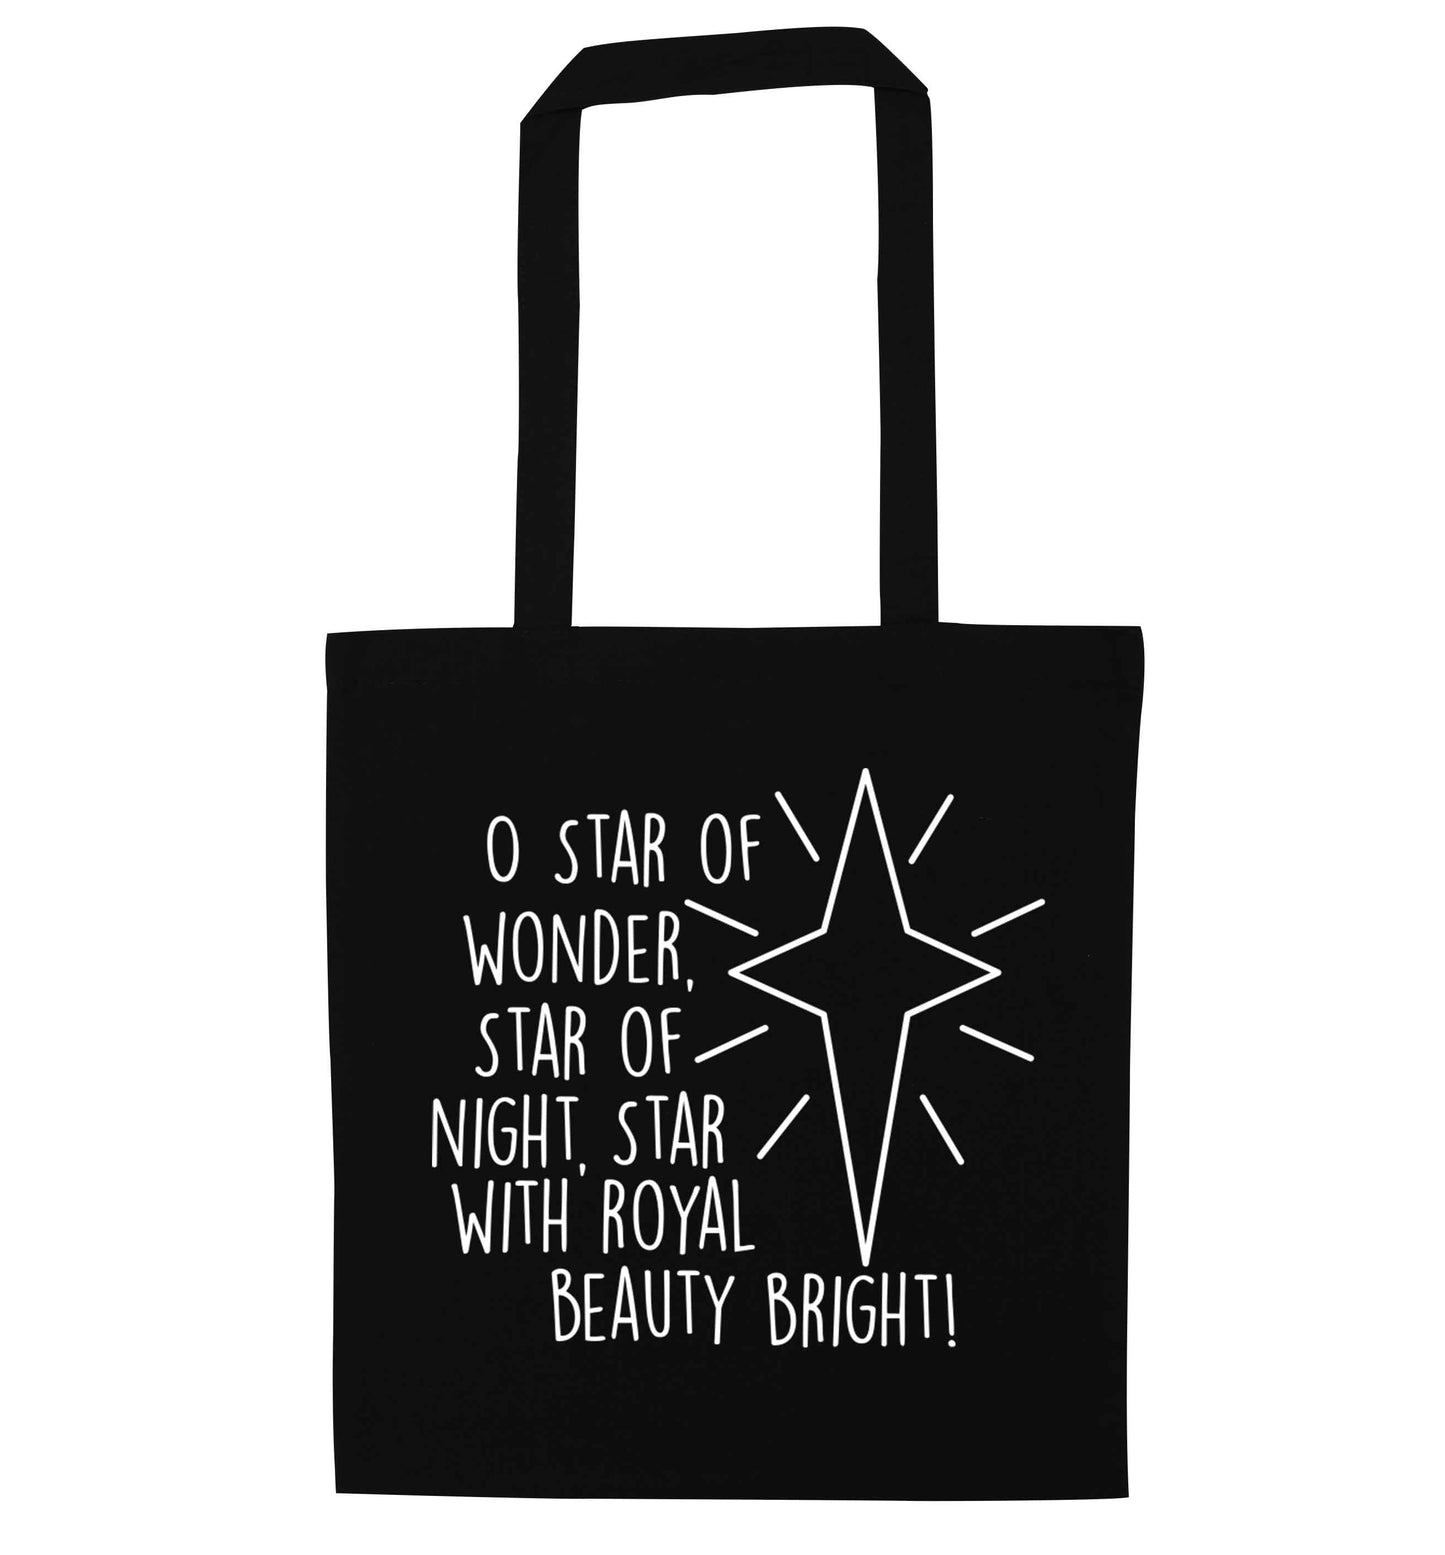 Oh star of wonder star of night, star with royal beauty bright black tote bag